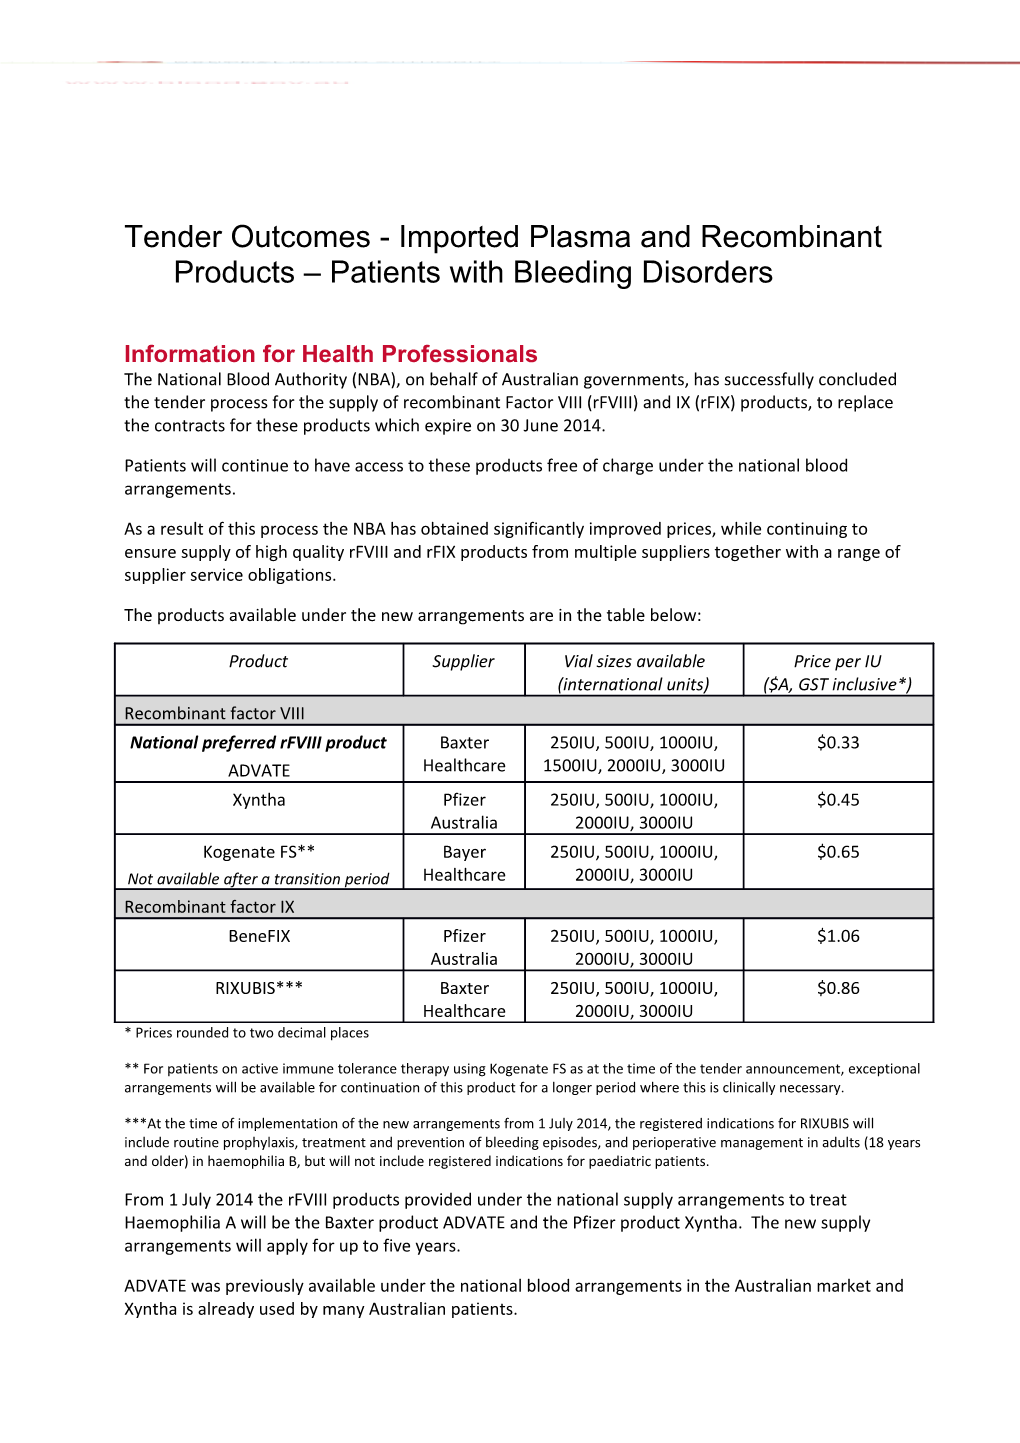 Tender Outcomes - Imported Plasma and Recombinant Products Patients with Bleeding Disorders